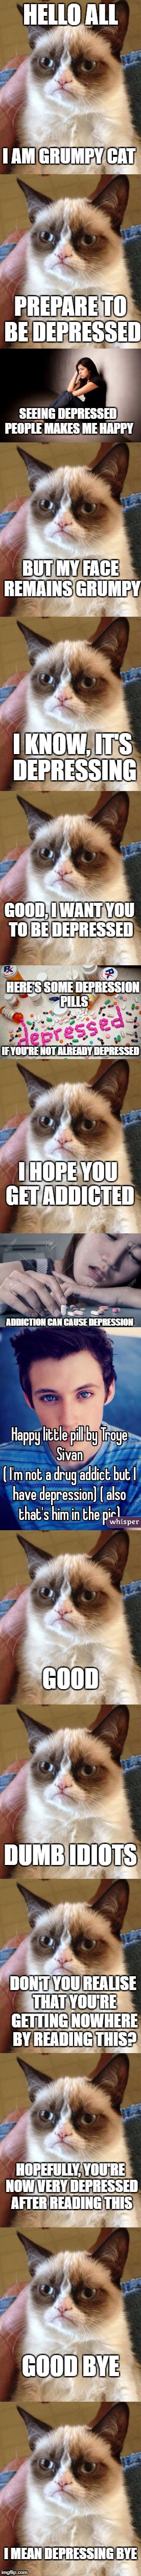 Depressing Meme Week Oct 11-18 A NeverSayMemes Event | HELLO ALL; I AM GRUMPY CAT; PREPARE TO BE DEPRESSED; SEEING DEPRESSED PEOPLE MAKES ME HAPPY; BUT MY FACE REMAINS GRUMPY; I KNOW, IT'S DEPRESSING; GOOD, I WANT YOU TO BE DEPRESSED; HERE'S SOME DEPRESSION PILLS; IF YOU'RE NOT ALREADY DEPRESSED; I HOPE YOU GET ADDICTED; ADDICTION CAN CAUSE DEPRESSION; GOOD; DUMB IDIOTS; DON'T YOU REALISE THAT YOU'RE GETTING NOWHERE BY READING THIS? HOPEFULLY, YOU'RE NOW VERY DEPRESSED AFTER READING THIS; GOOD BYE; I MEAN DEPRESSING BYE | image tagged in memes,grumpy cat,funny,depressing meme week,dank memes | made w/ Imgflip meme maker